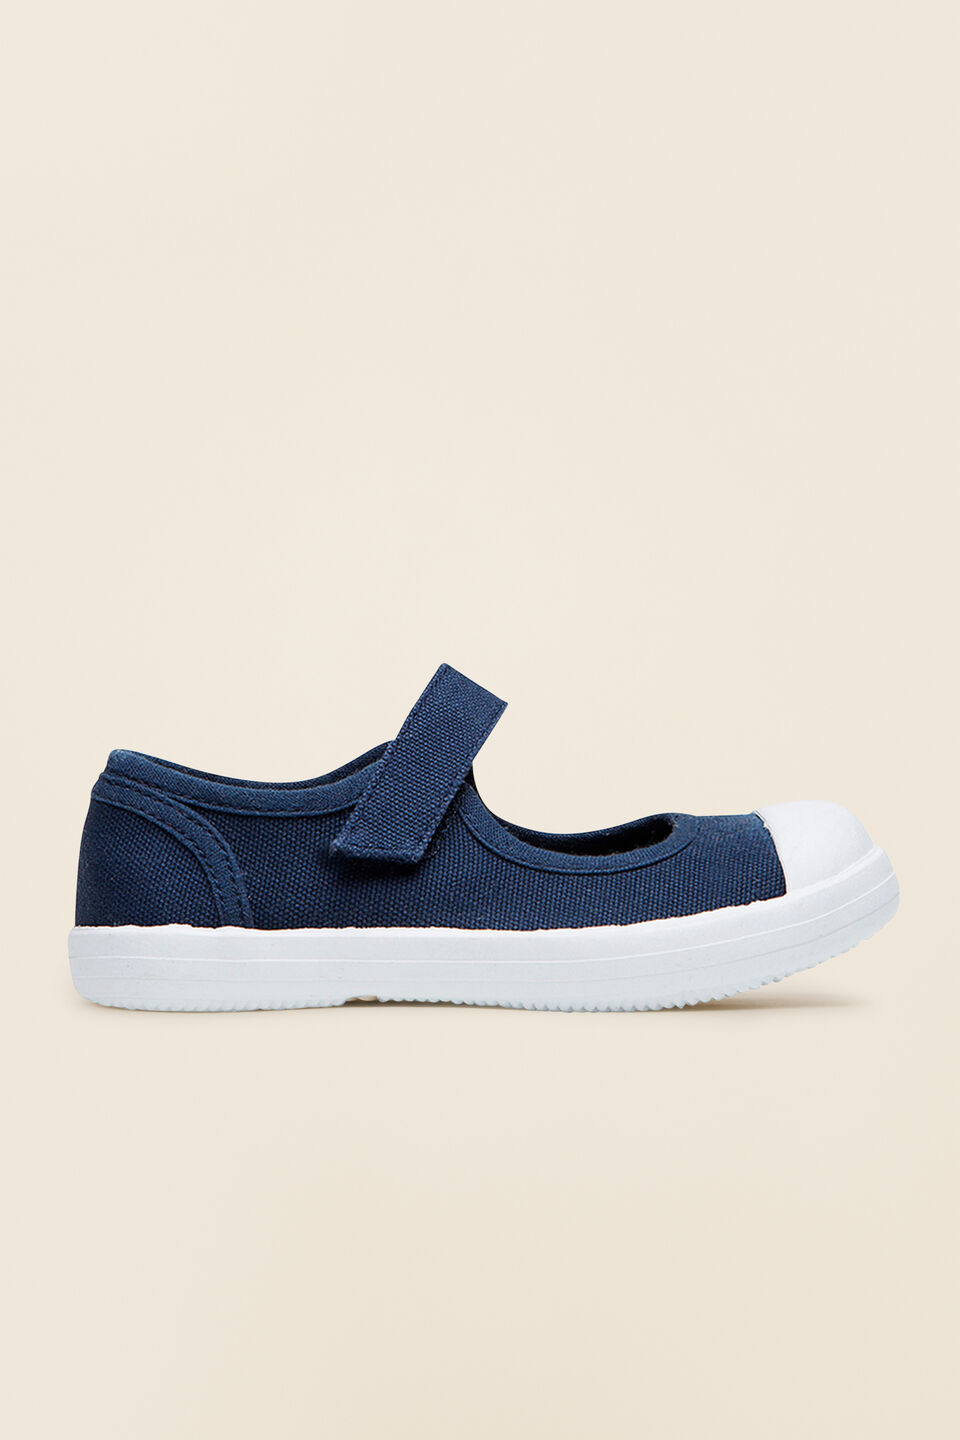 Mary Jane Canvas Shoes  Navy